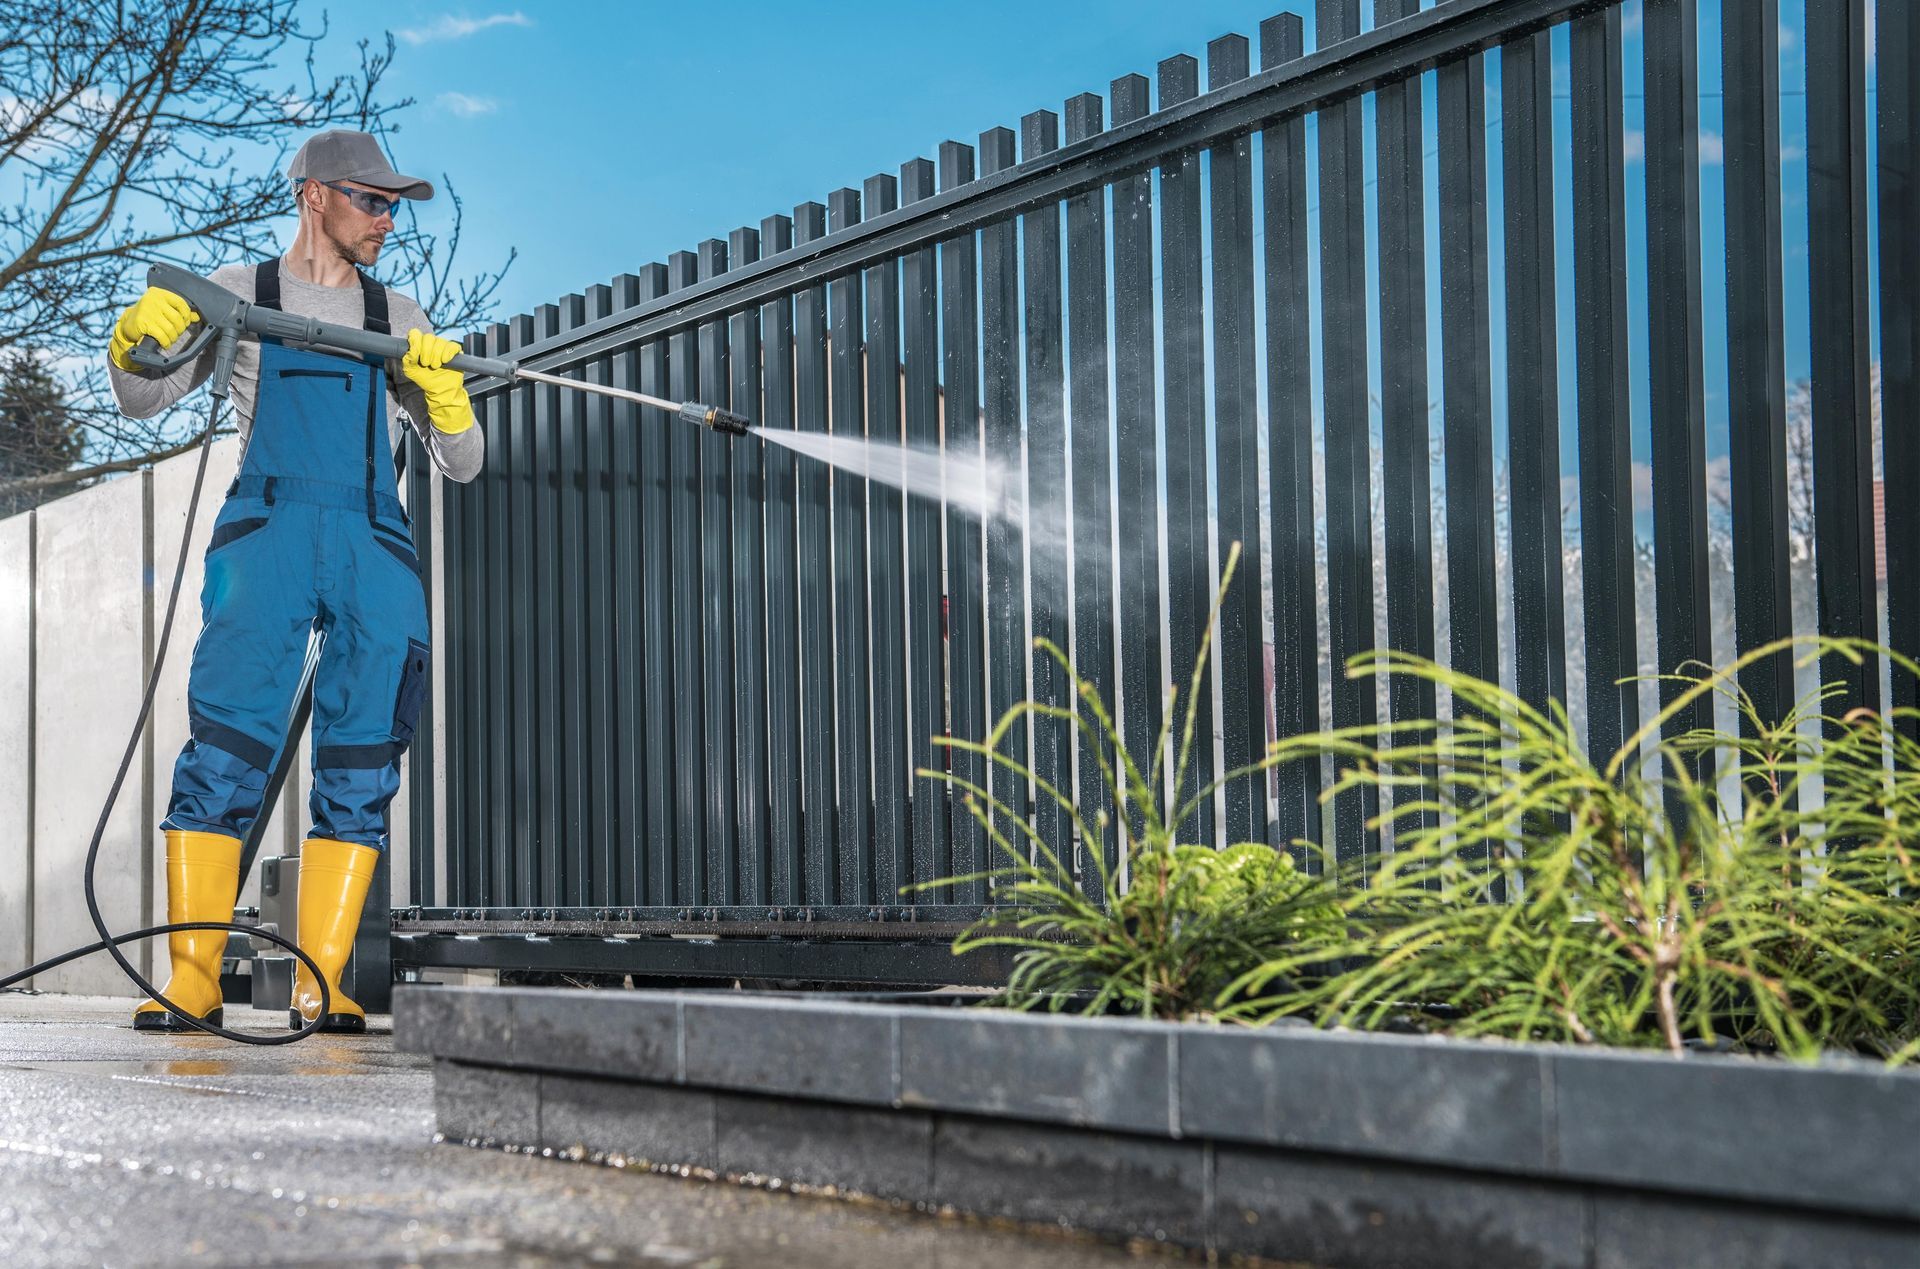 A man is using a high pressure washer to clean a fence.